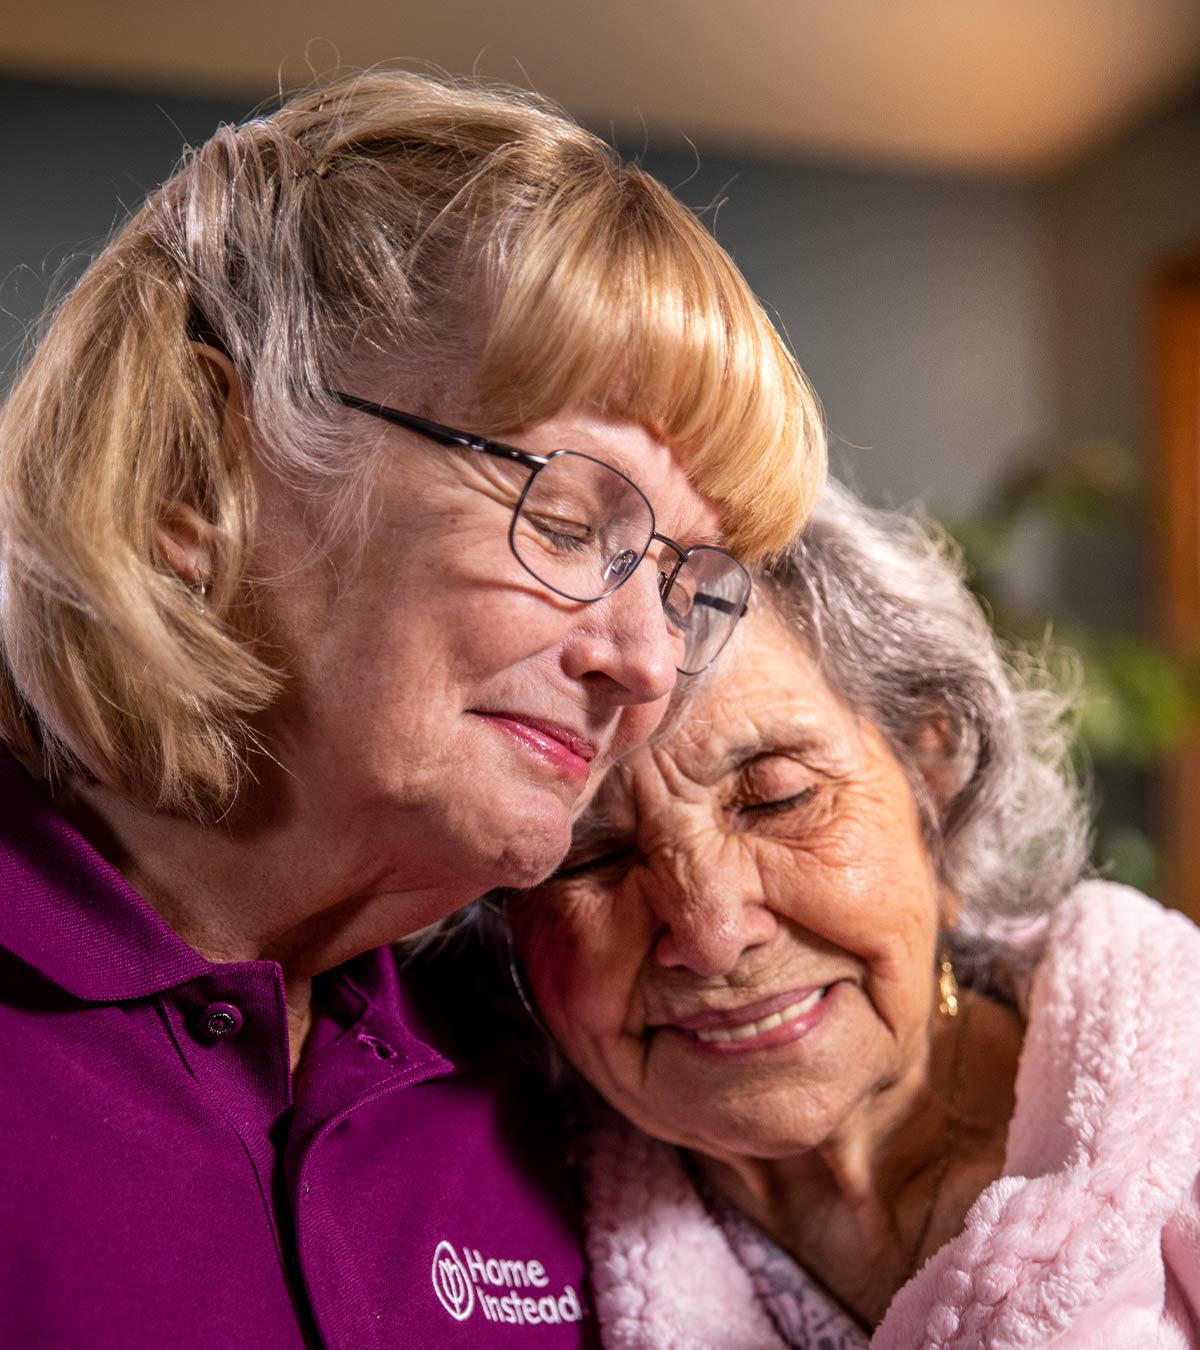 CAREGiver providing in-home senior care services. Home Instead of Bloomington, IN provides Elder Care to aging adults. 